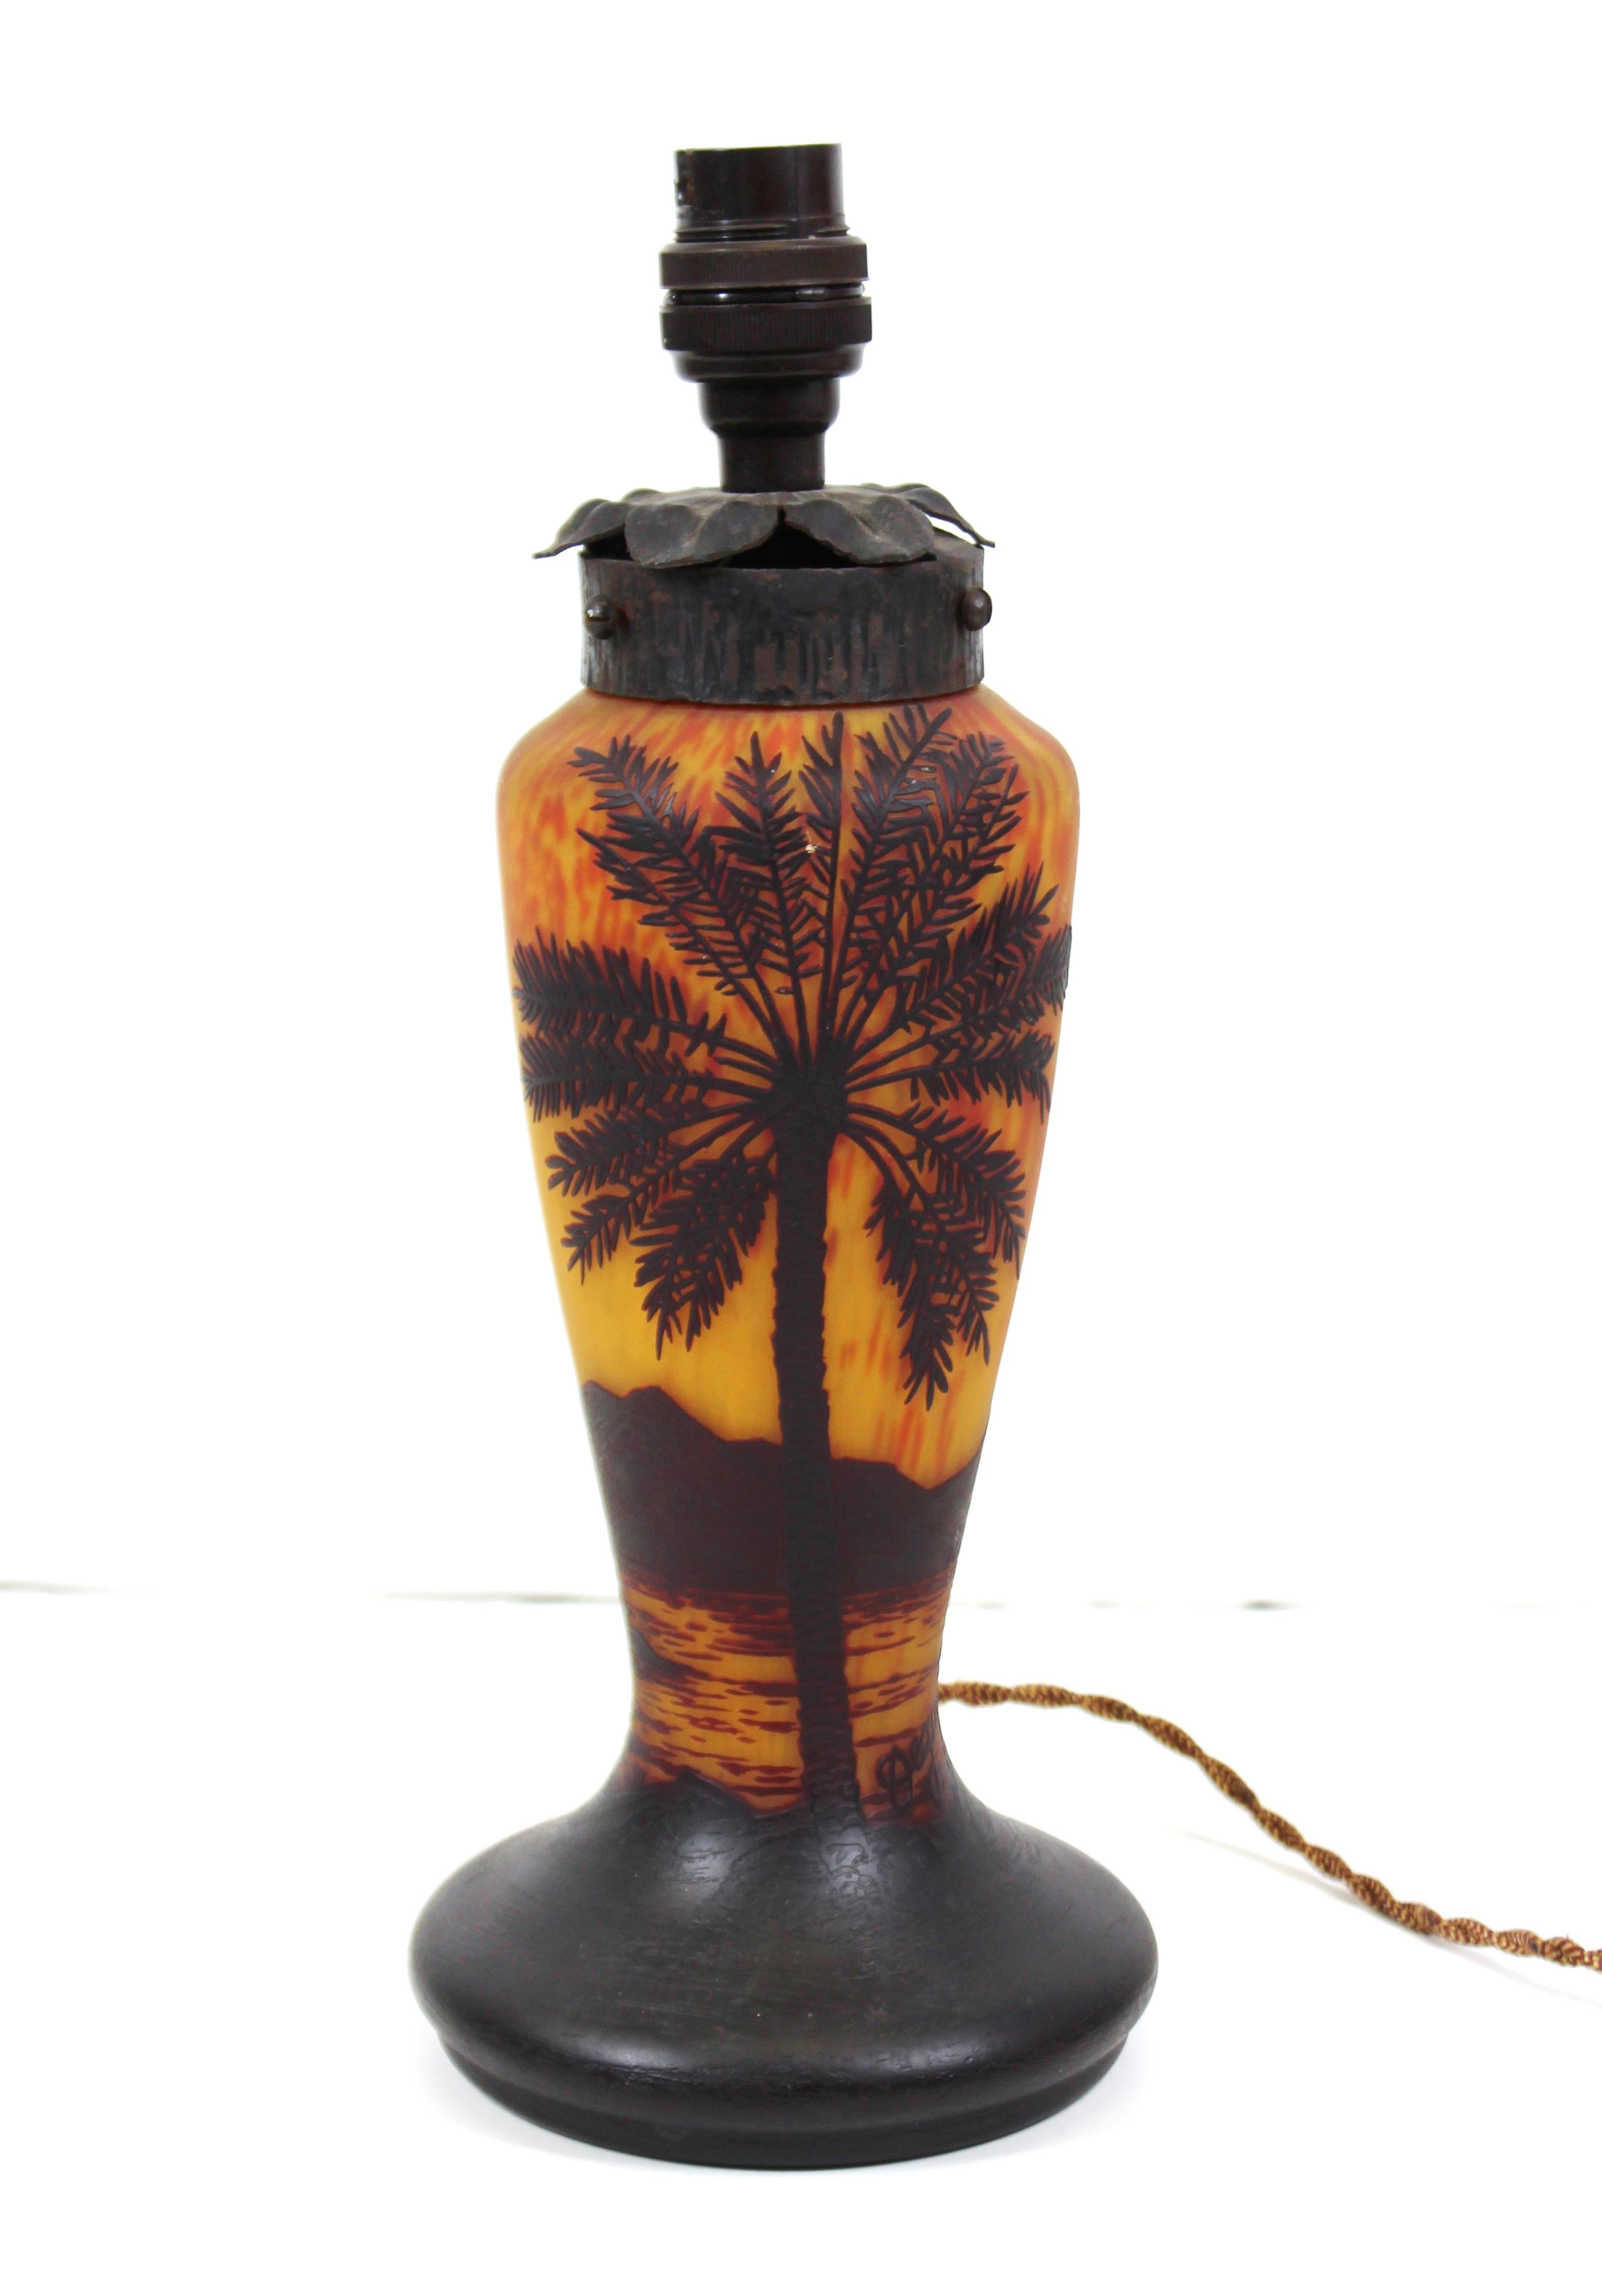 French Art Nouveau diminutive table lamp in cameo glass made by Degué. The piece has a palm tree motif and delicate wrought iron mount. Signed Degué near the base of the palm tree. In great antique condition with age-appropriate wear and use.